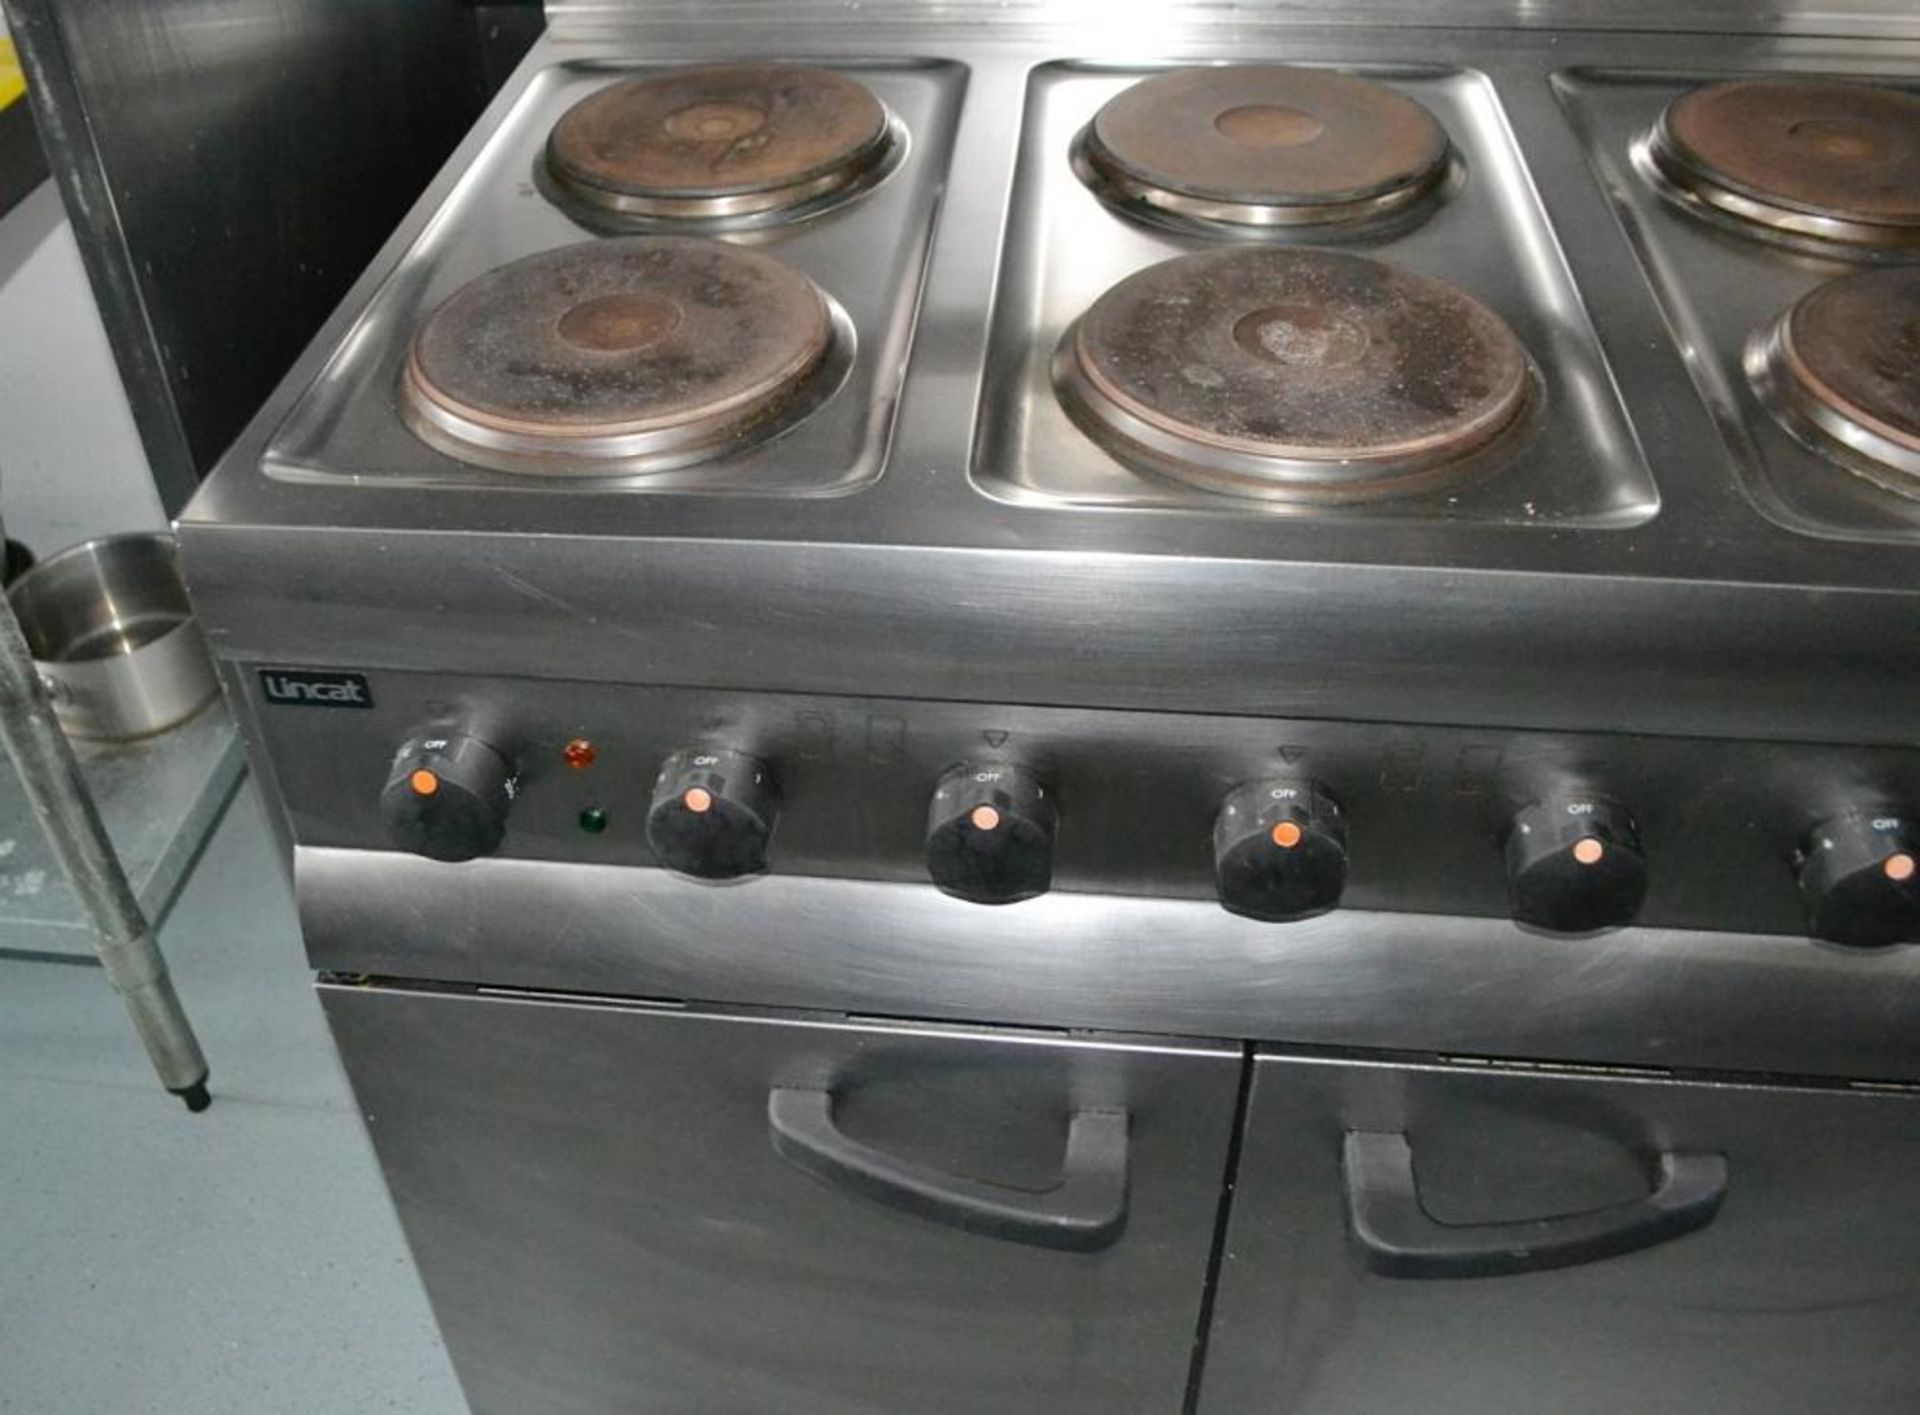 1 x Lincat Silverlink 6 Plate Commercial Electric Burner and Extraction Unit - CL425 - Location: Alt - Image 5 of 16